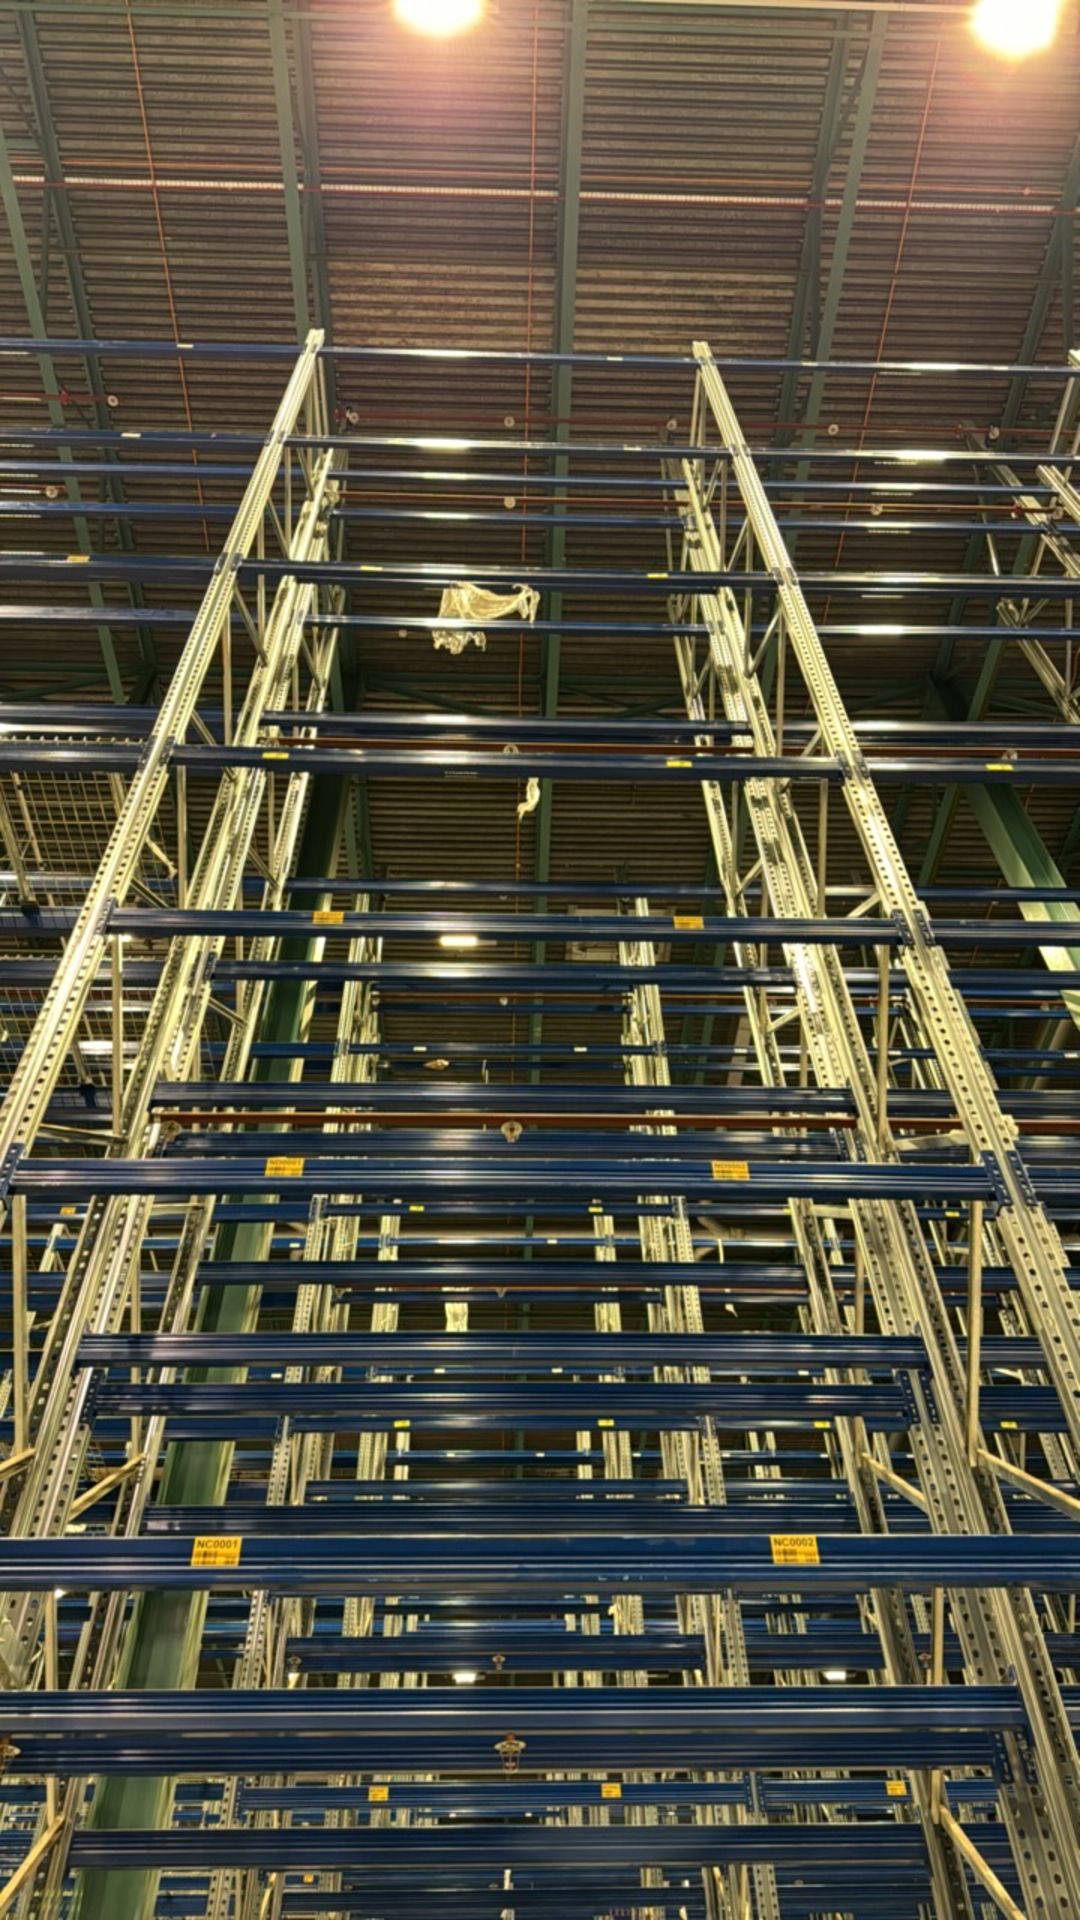 Run Of 22 Bays Of Back To Back Boltless Pallet Racking - Image 6 of 10